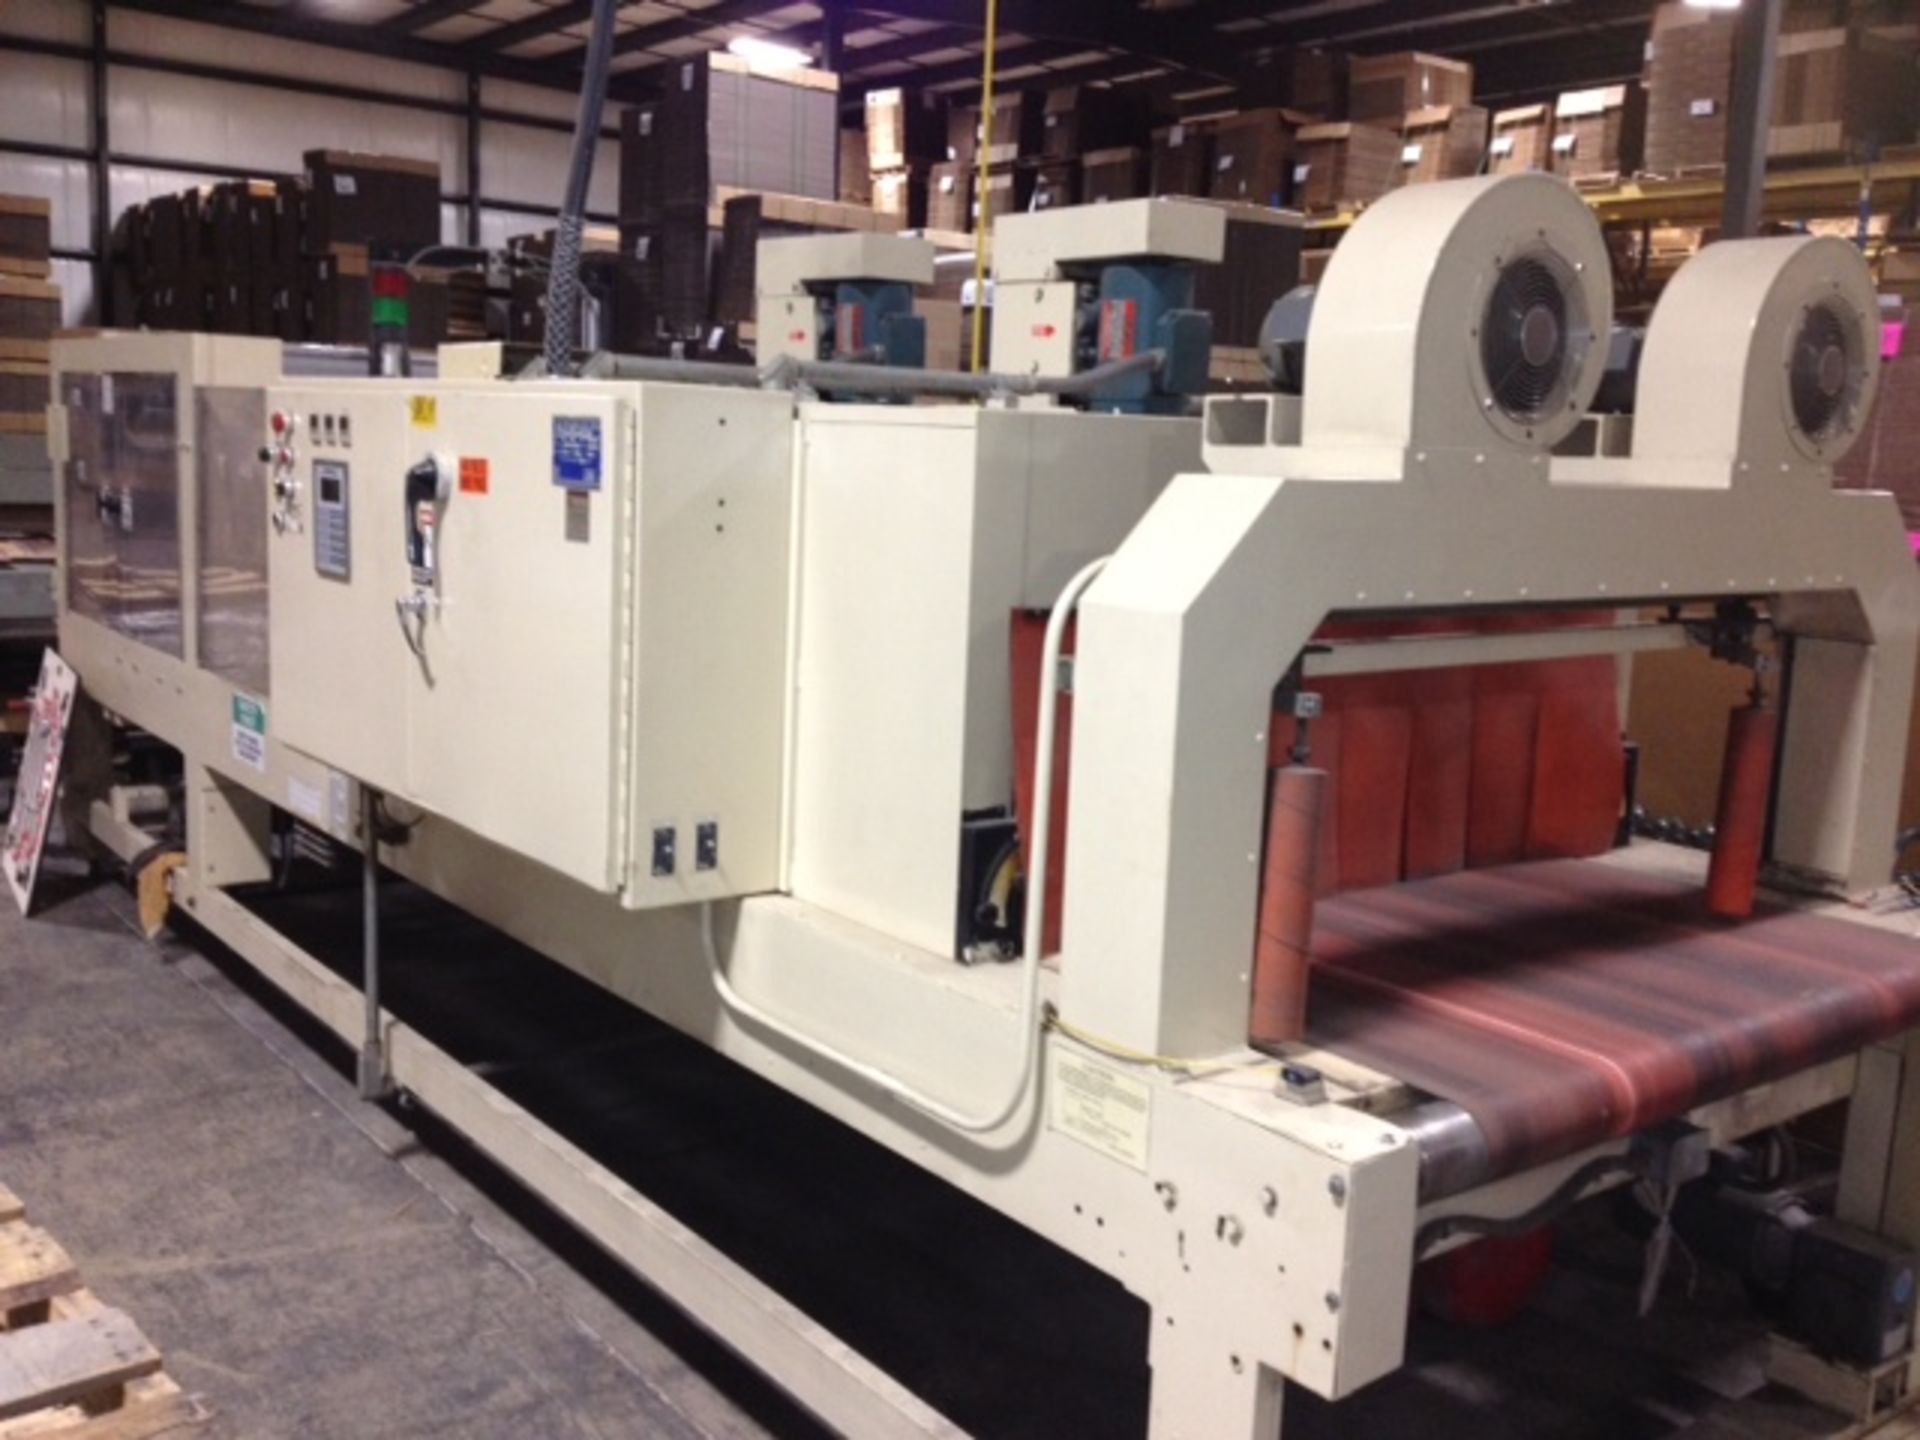 Arpac Shrink Bundler, Model # 1058-50, S/N 2799, right angle infeed with 50" wide film - Image 3 of 5